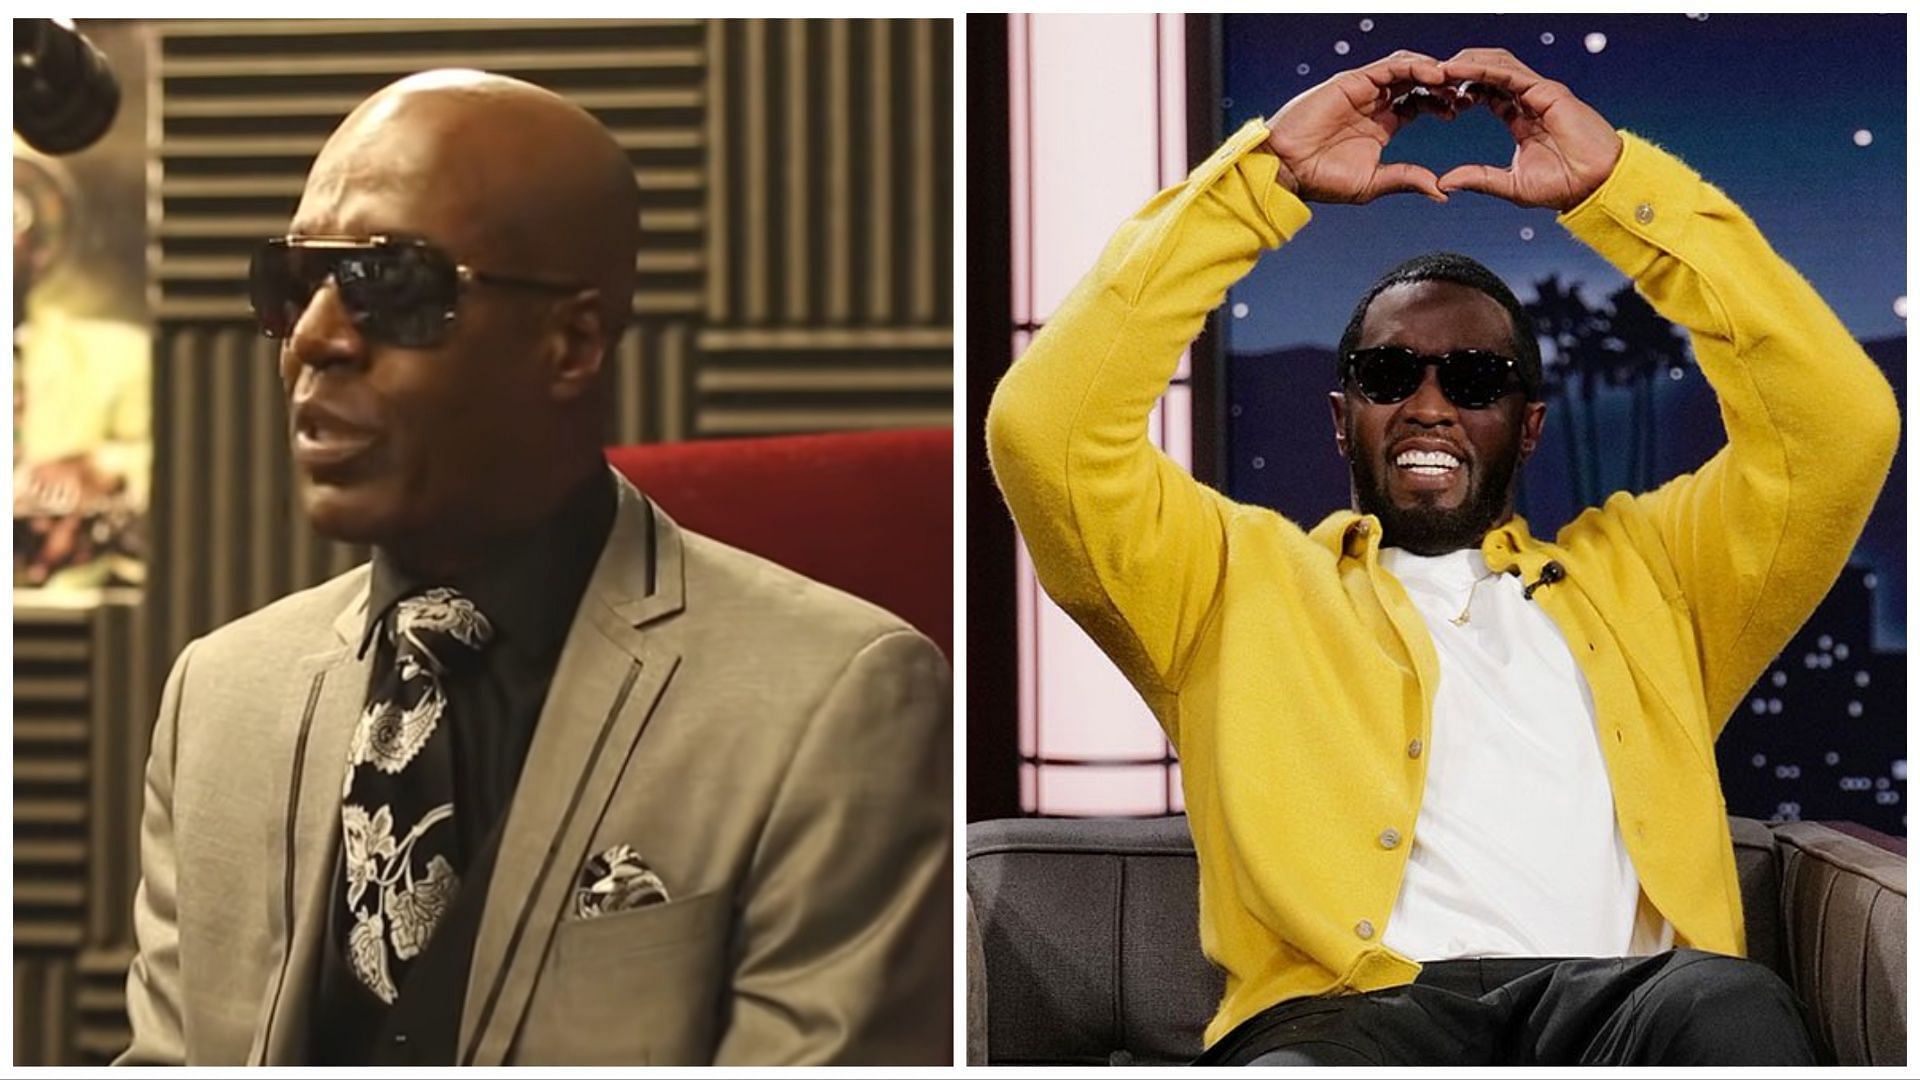 Diddy accused of SA again, alonfside Aaron Hall (Image via Instagram/@diddy, YouTube/djvlad)